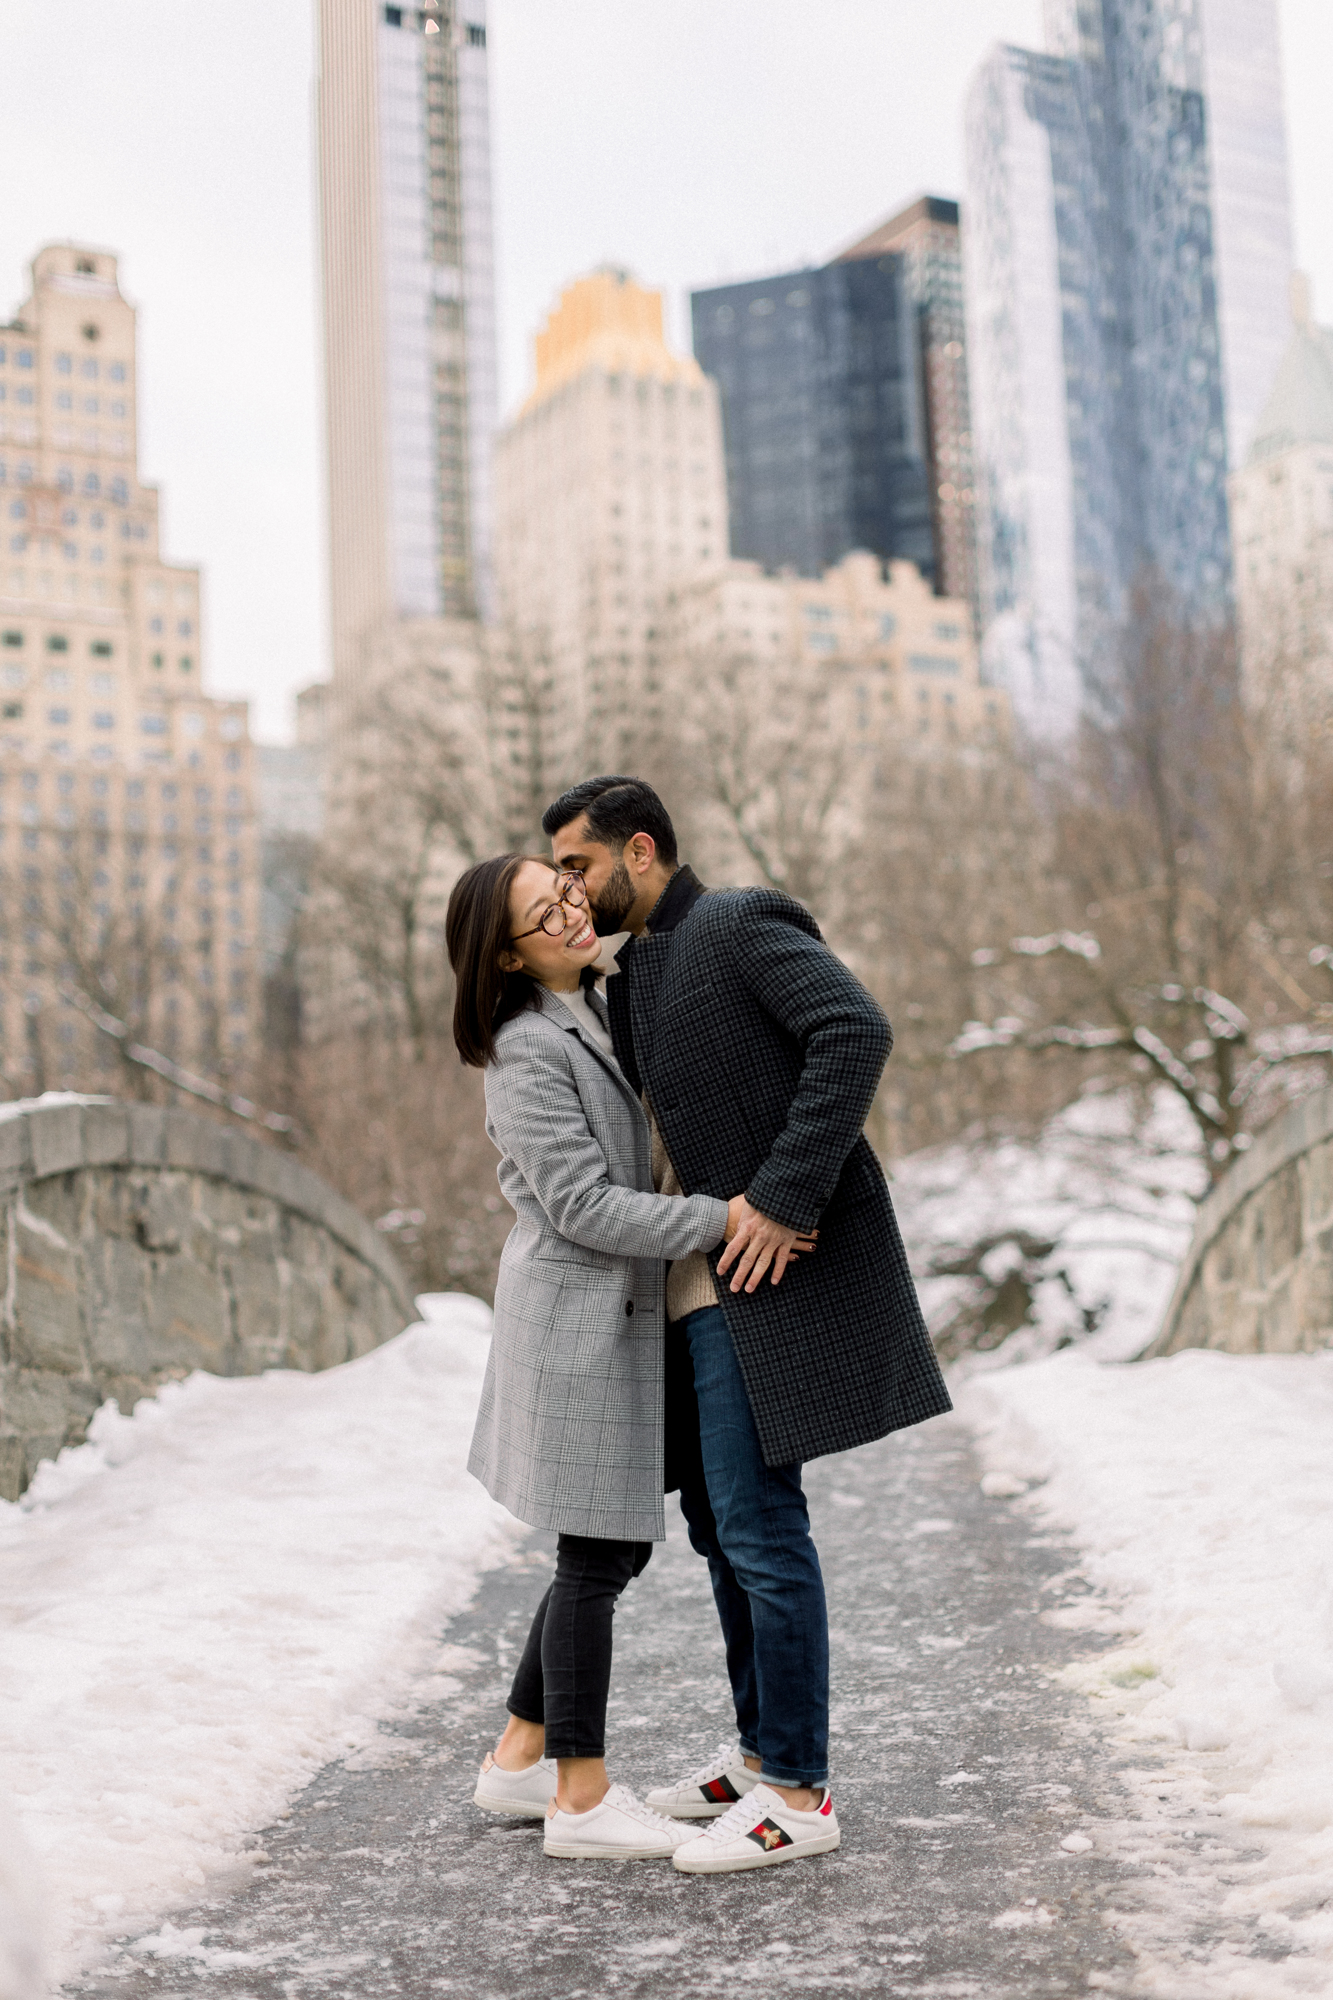 Snowy and Magical Winter Engagement Photos in Central Park NYC